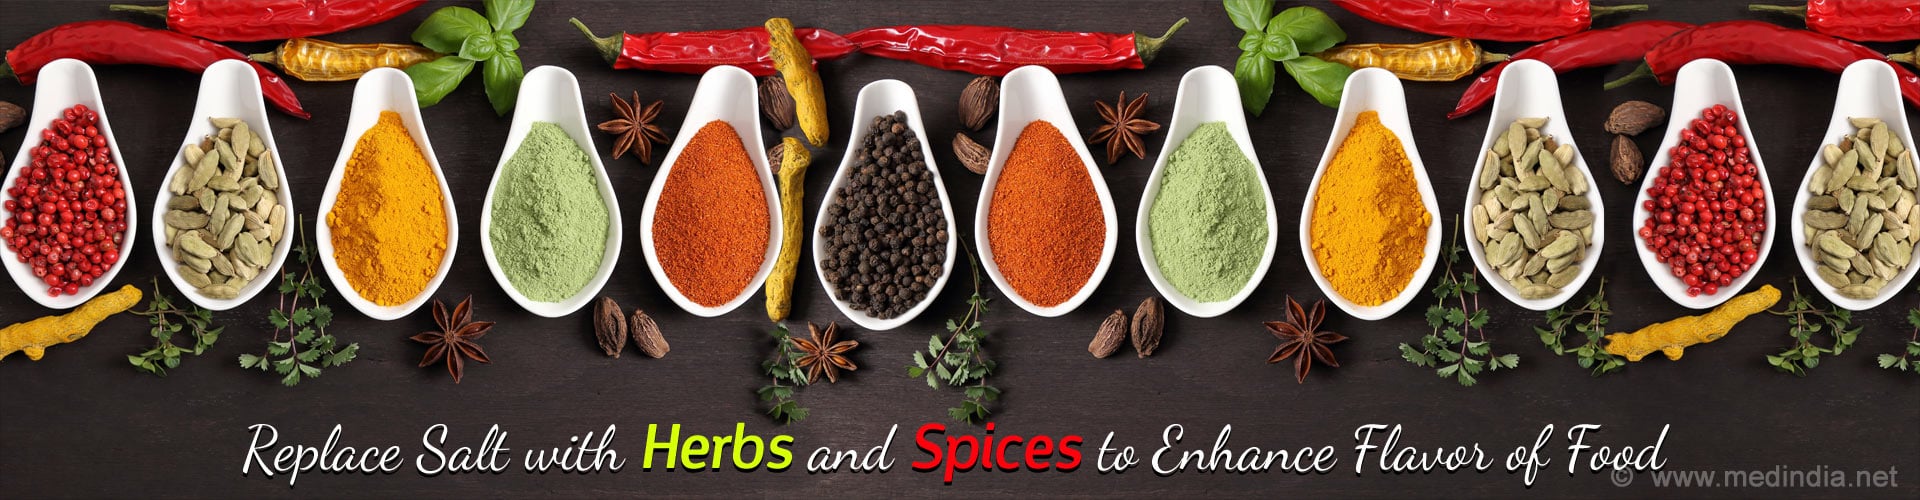 Replace Salt with Herbs and Spices to Enhance Flavor of Food